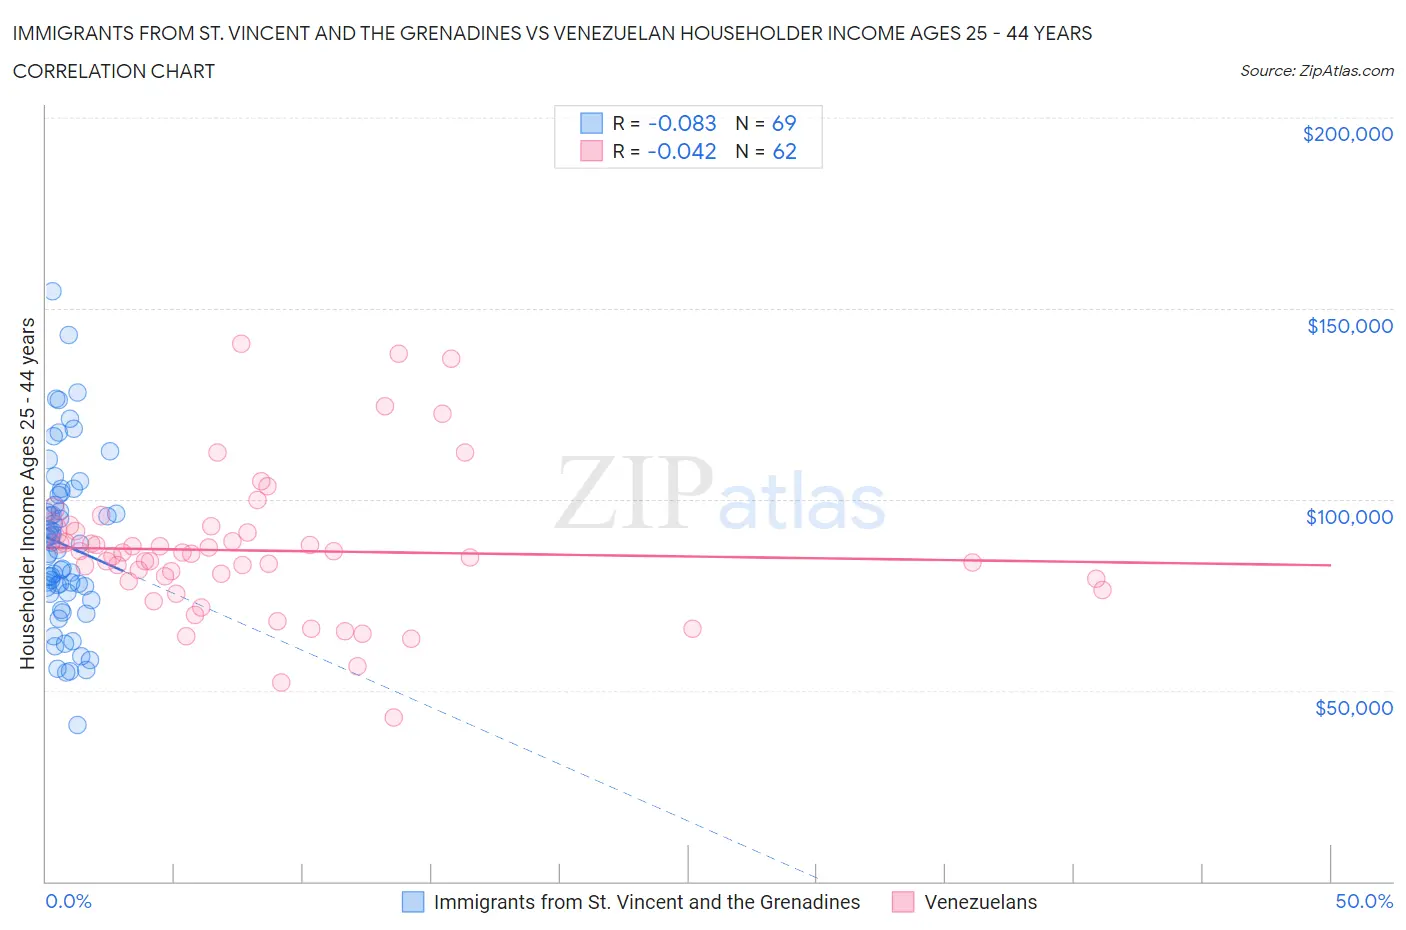 Immigrants from St. Vincent and the Grenadines vs Venezuelan Householder Income Ages 25 - 44 years